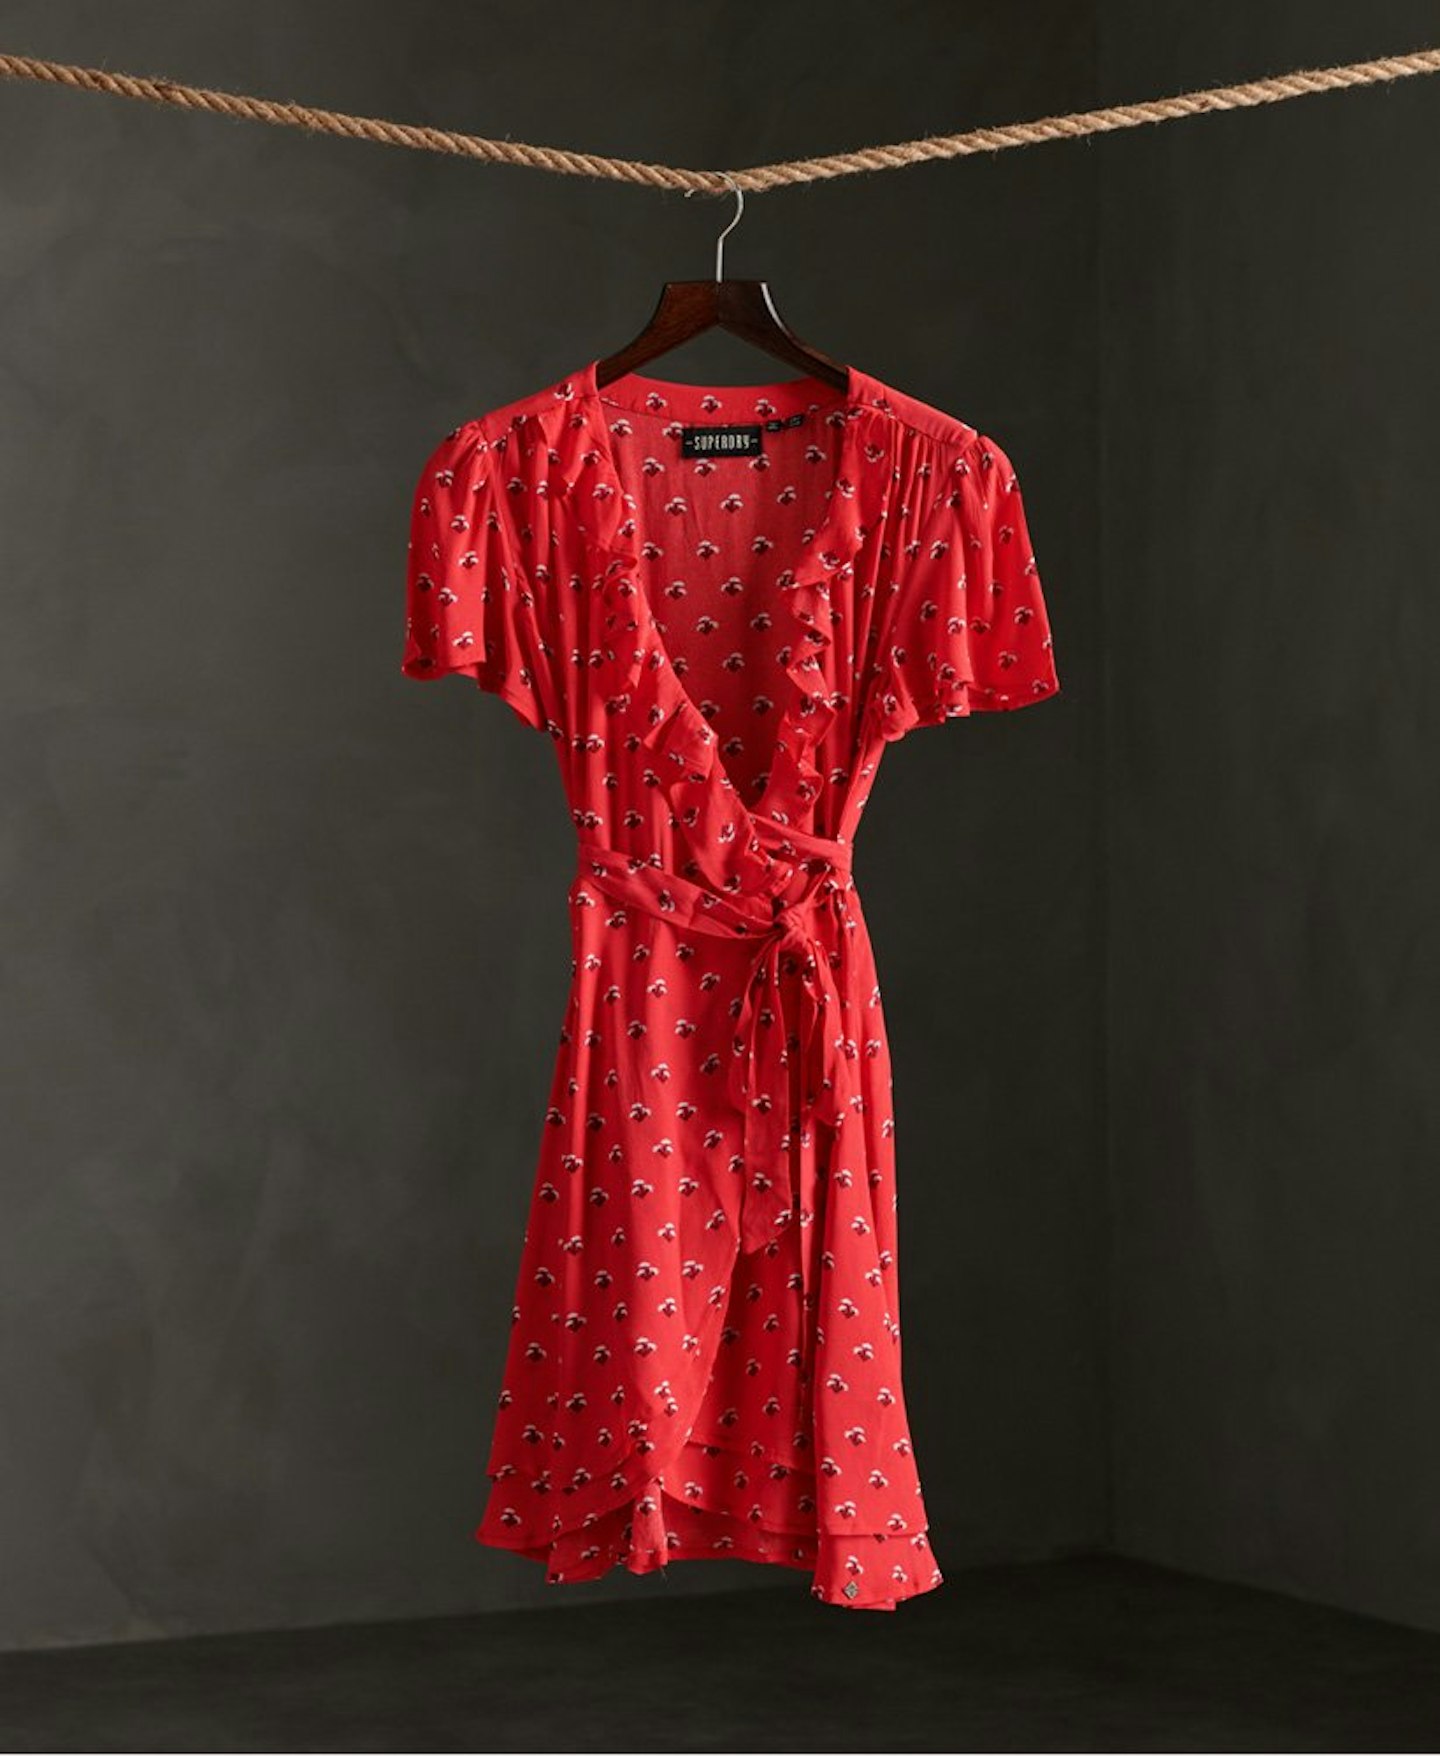 Superdry, Red Wrap Dress, £39.99